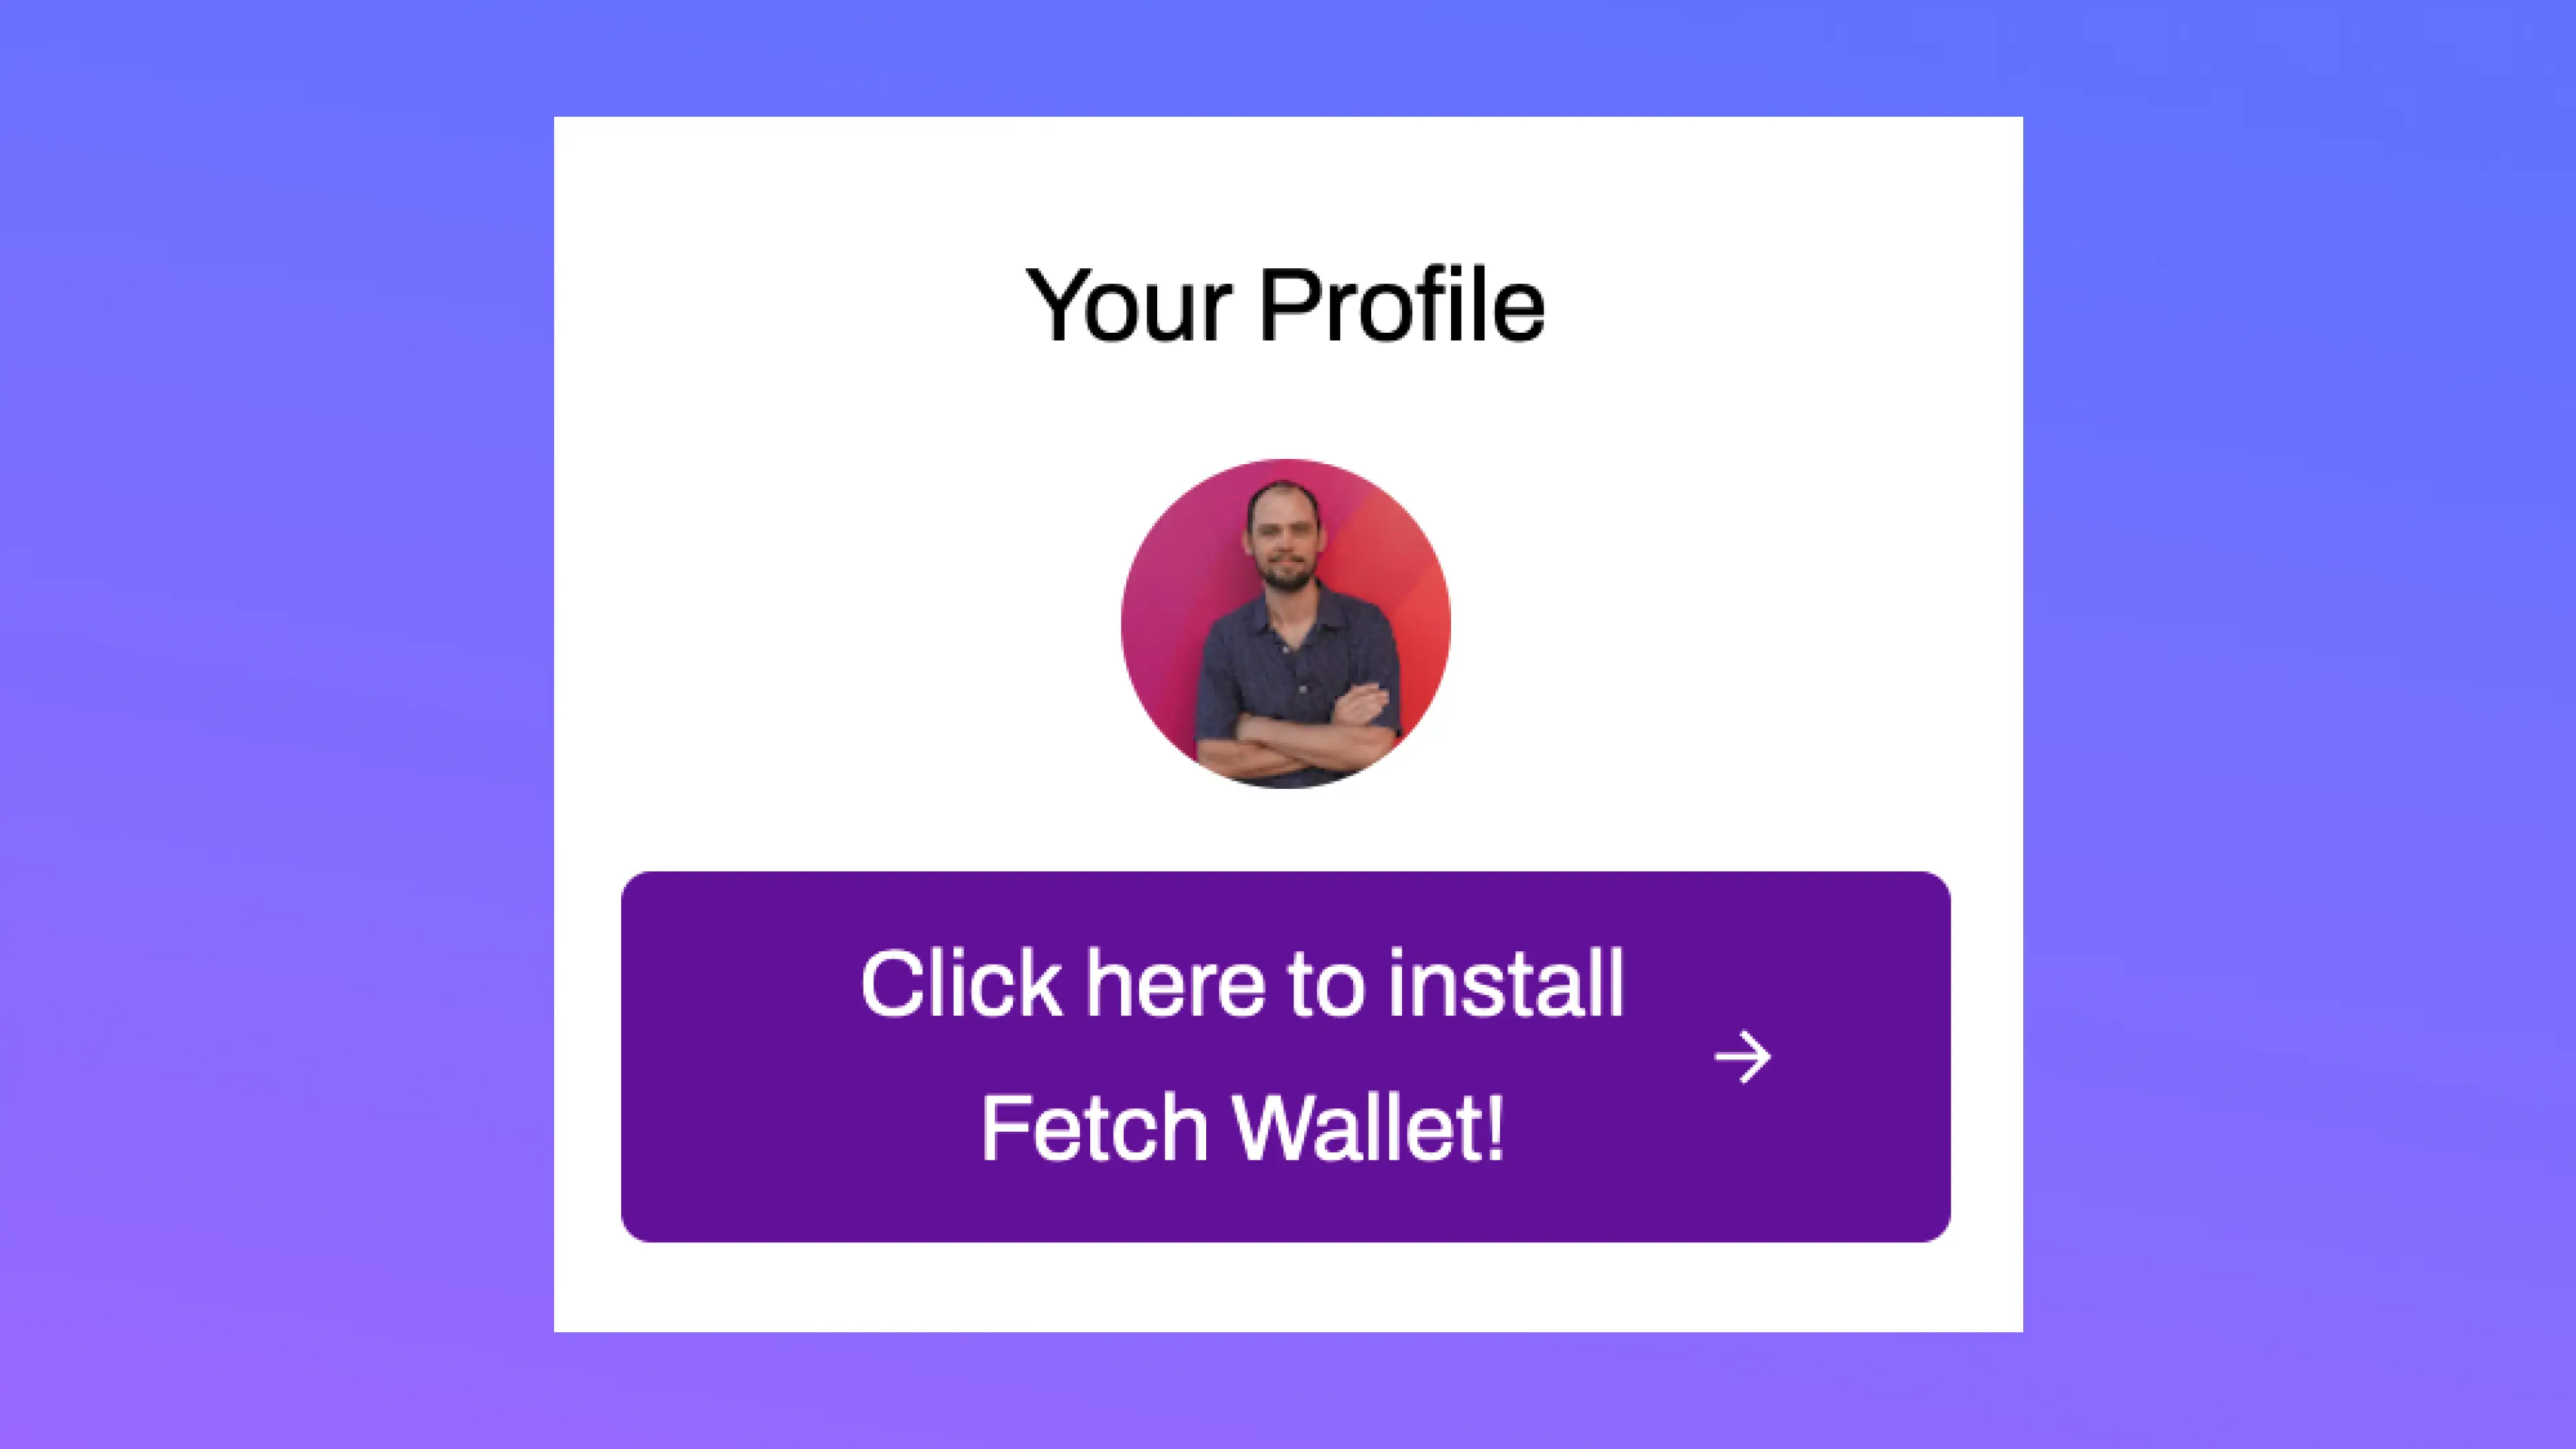 Click the button to install the fetch wallet